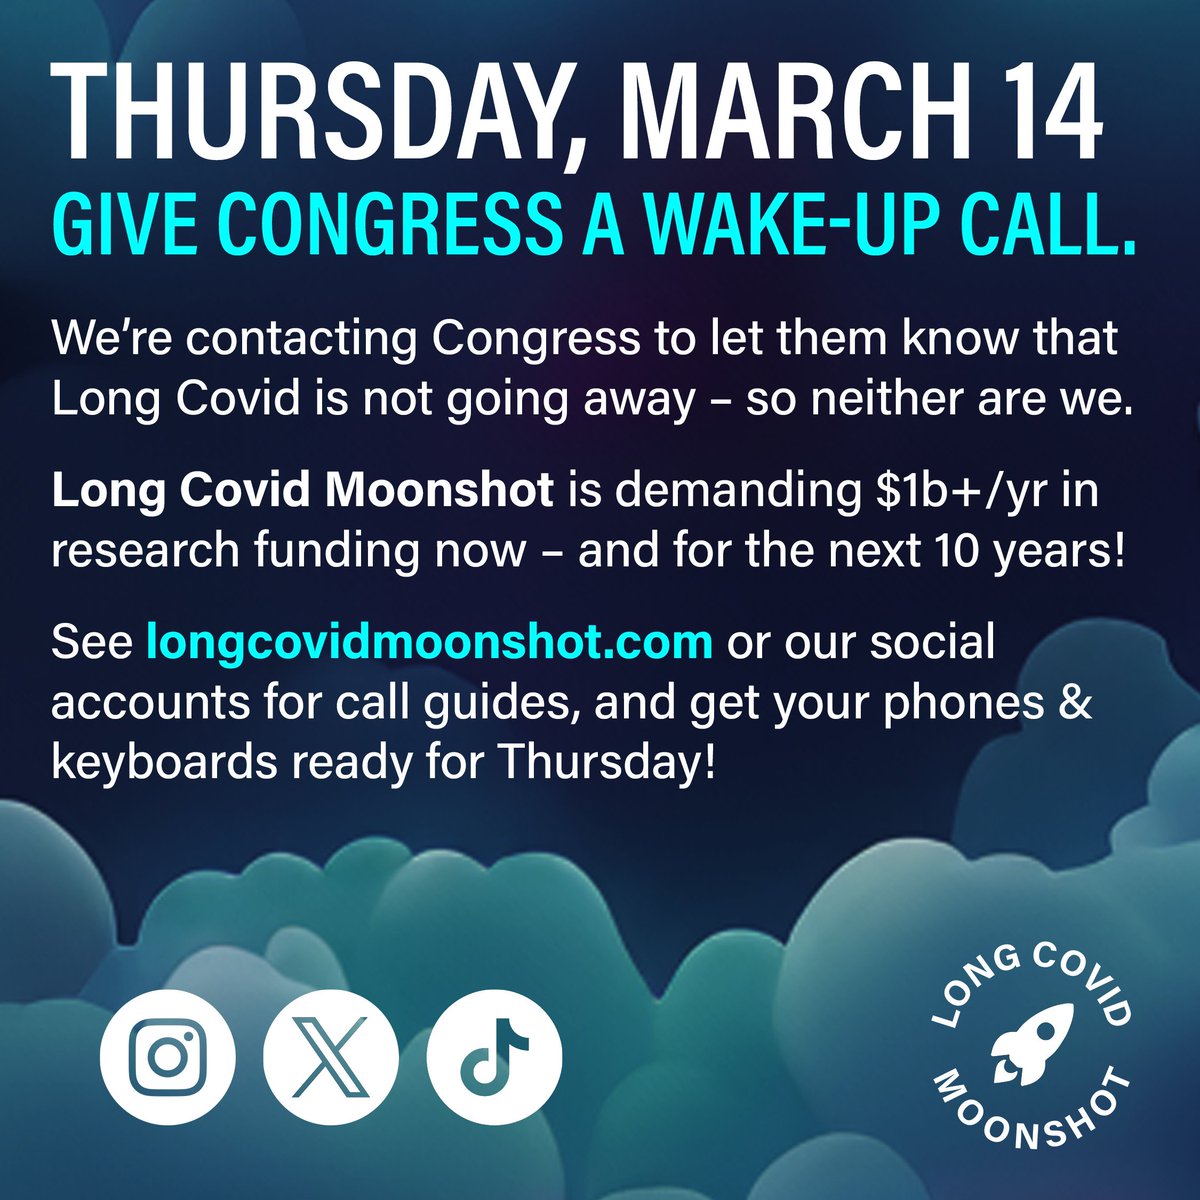 Give Congress a #LongCovid wake-up call! On Thursday, March 14, we're calling our reps to demand a #LongCovidMoonshot—$1B+ in annual research funding to find treatment for the MILLIONS suffering without help. Full call guide available our website 🚀